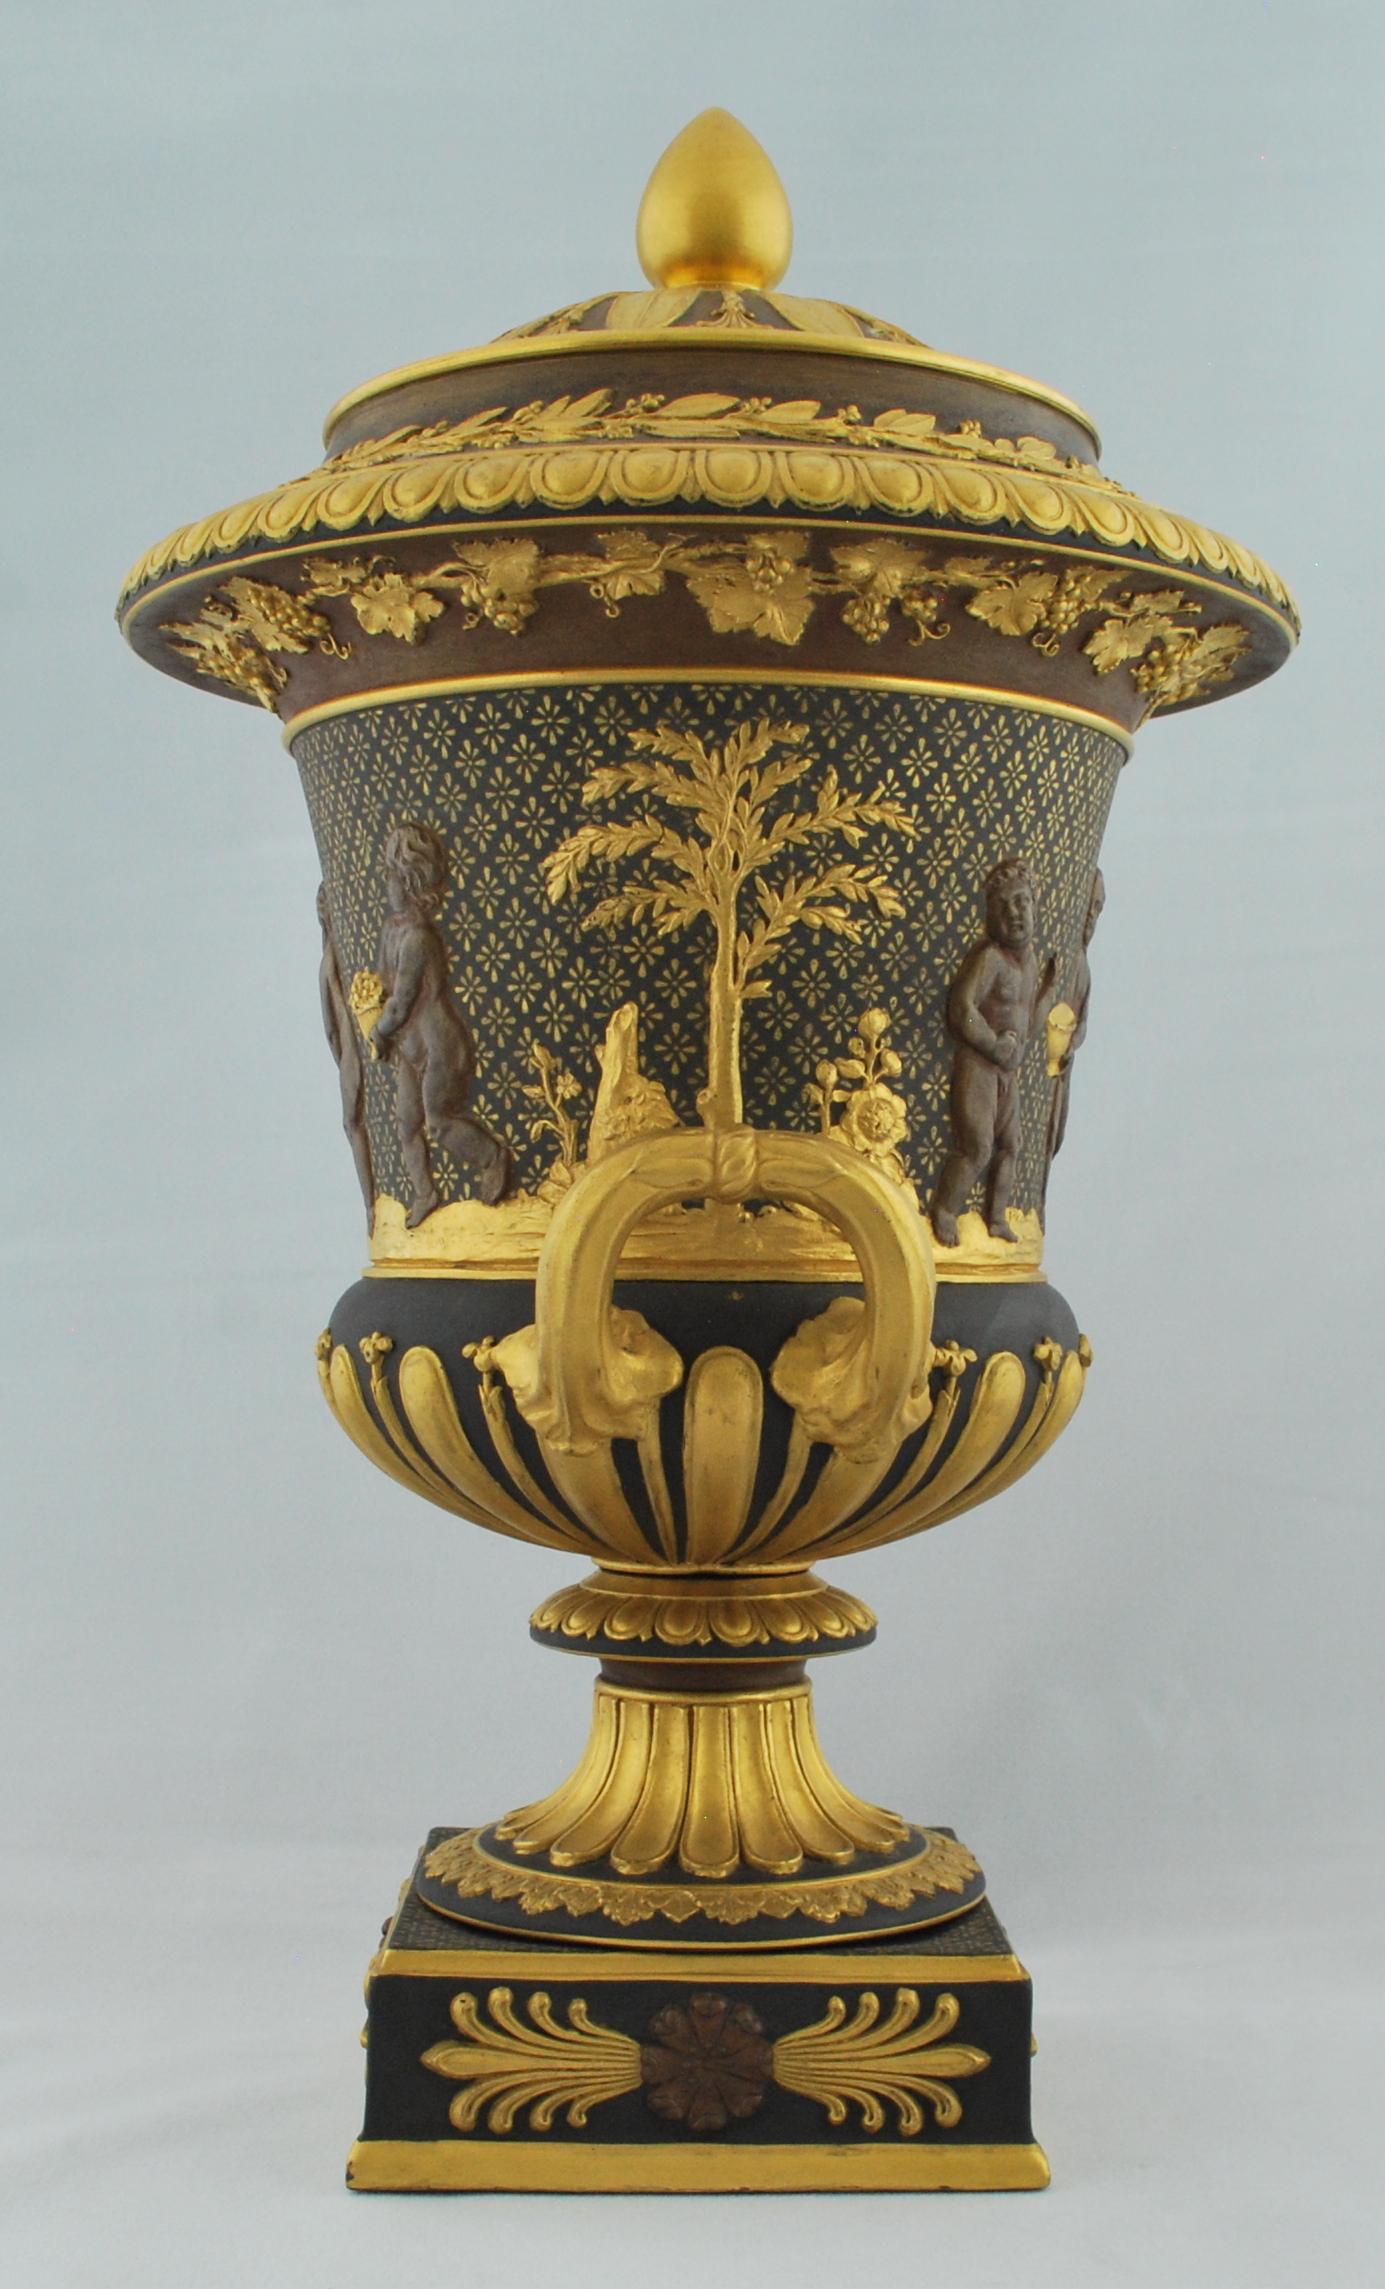 An unusually large example of a scarce form of decoration. The vase is bronzed and gilded, in imitation of Japanese bronzes of the period.

   